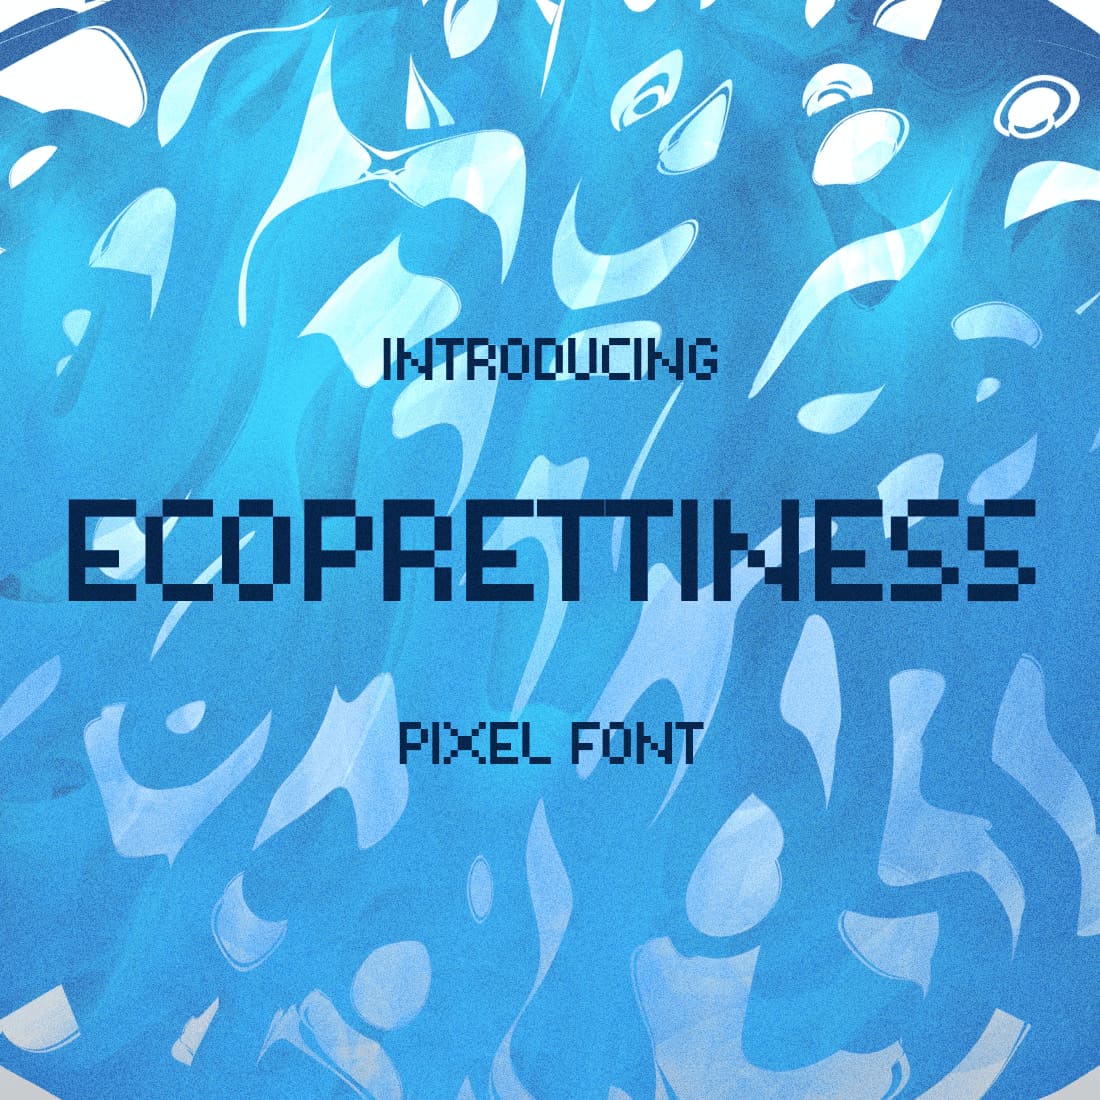 Ecoprettiness Pixel Font Example.